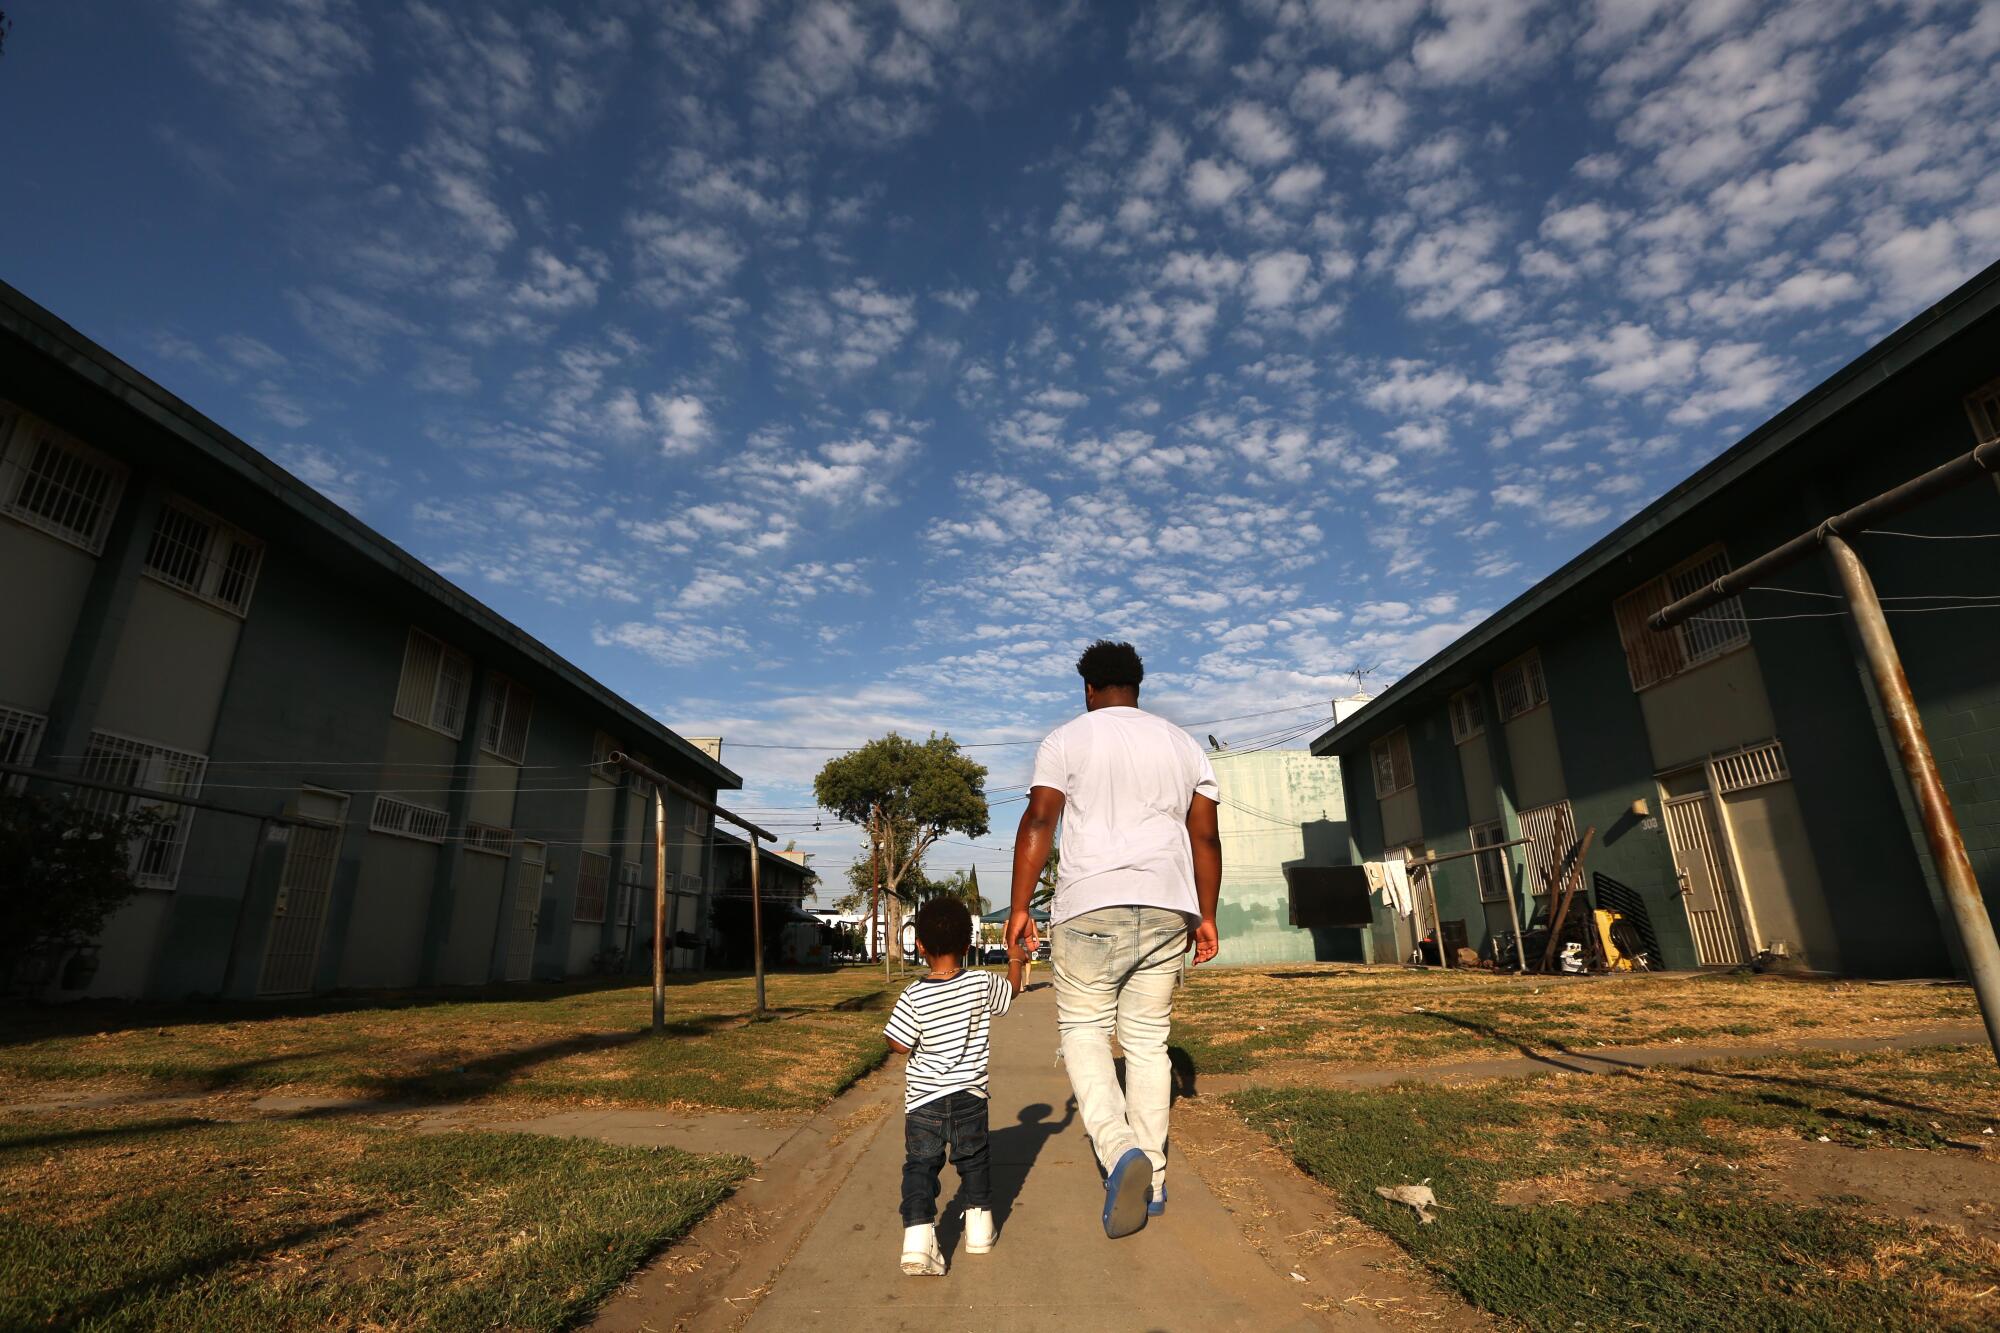 Daylyn Busters, 17, walks with his nephew Ah'Kari George, 1, at the Imperial Courts housing project in Watts.